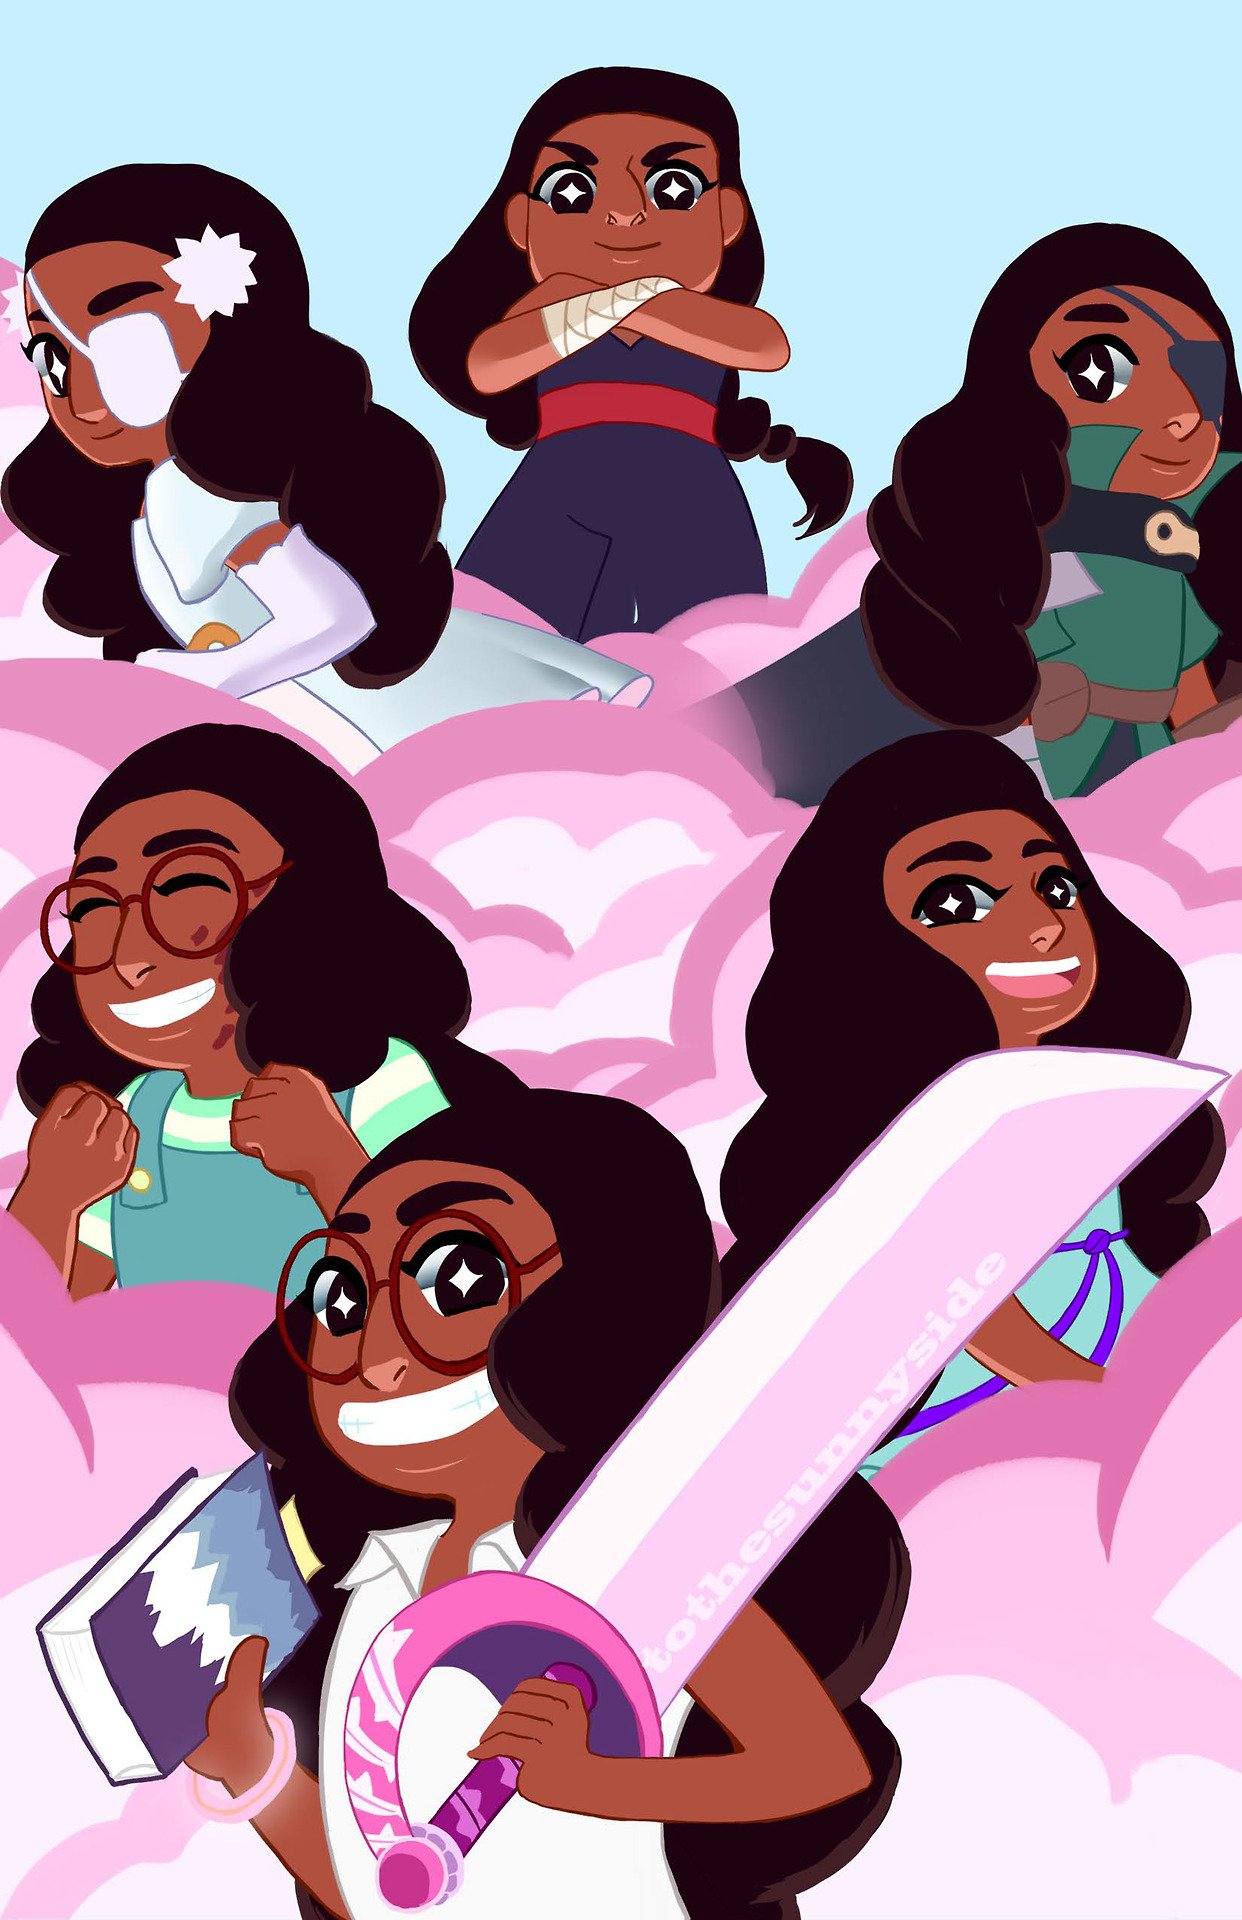 I never got the chance to post these posters I did of Connie and Steven. I love these kids!